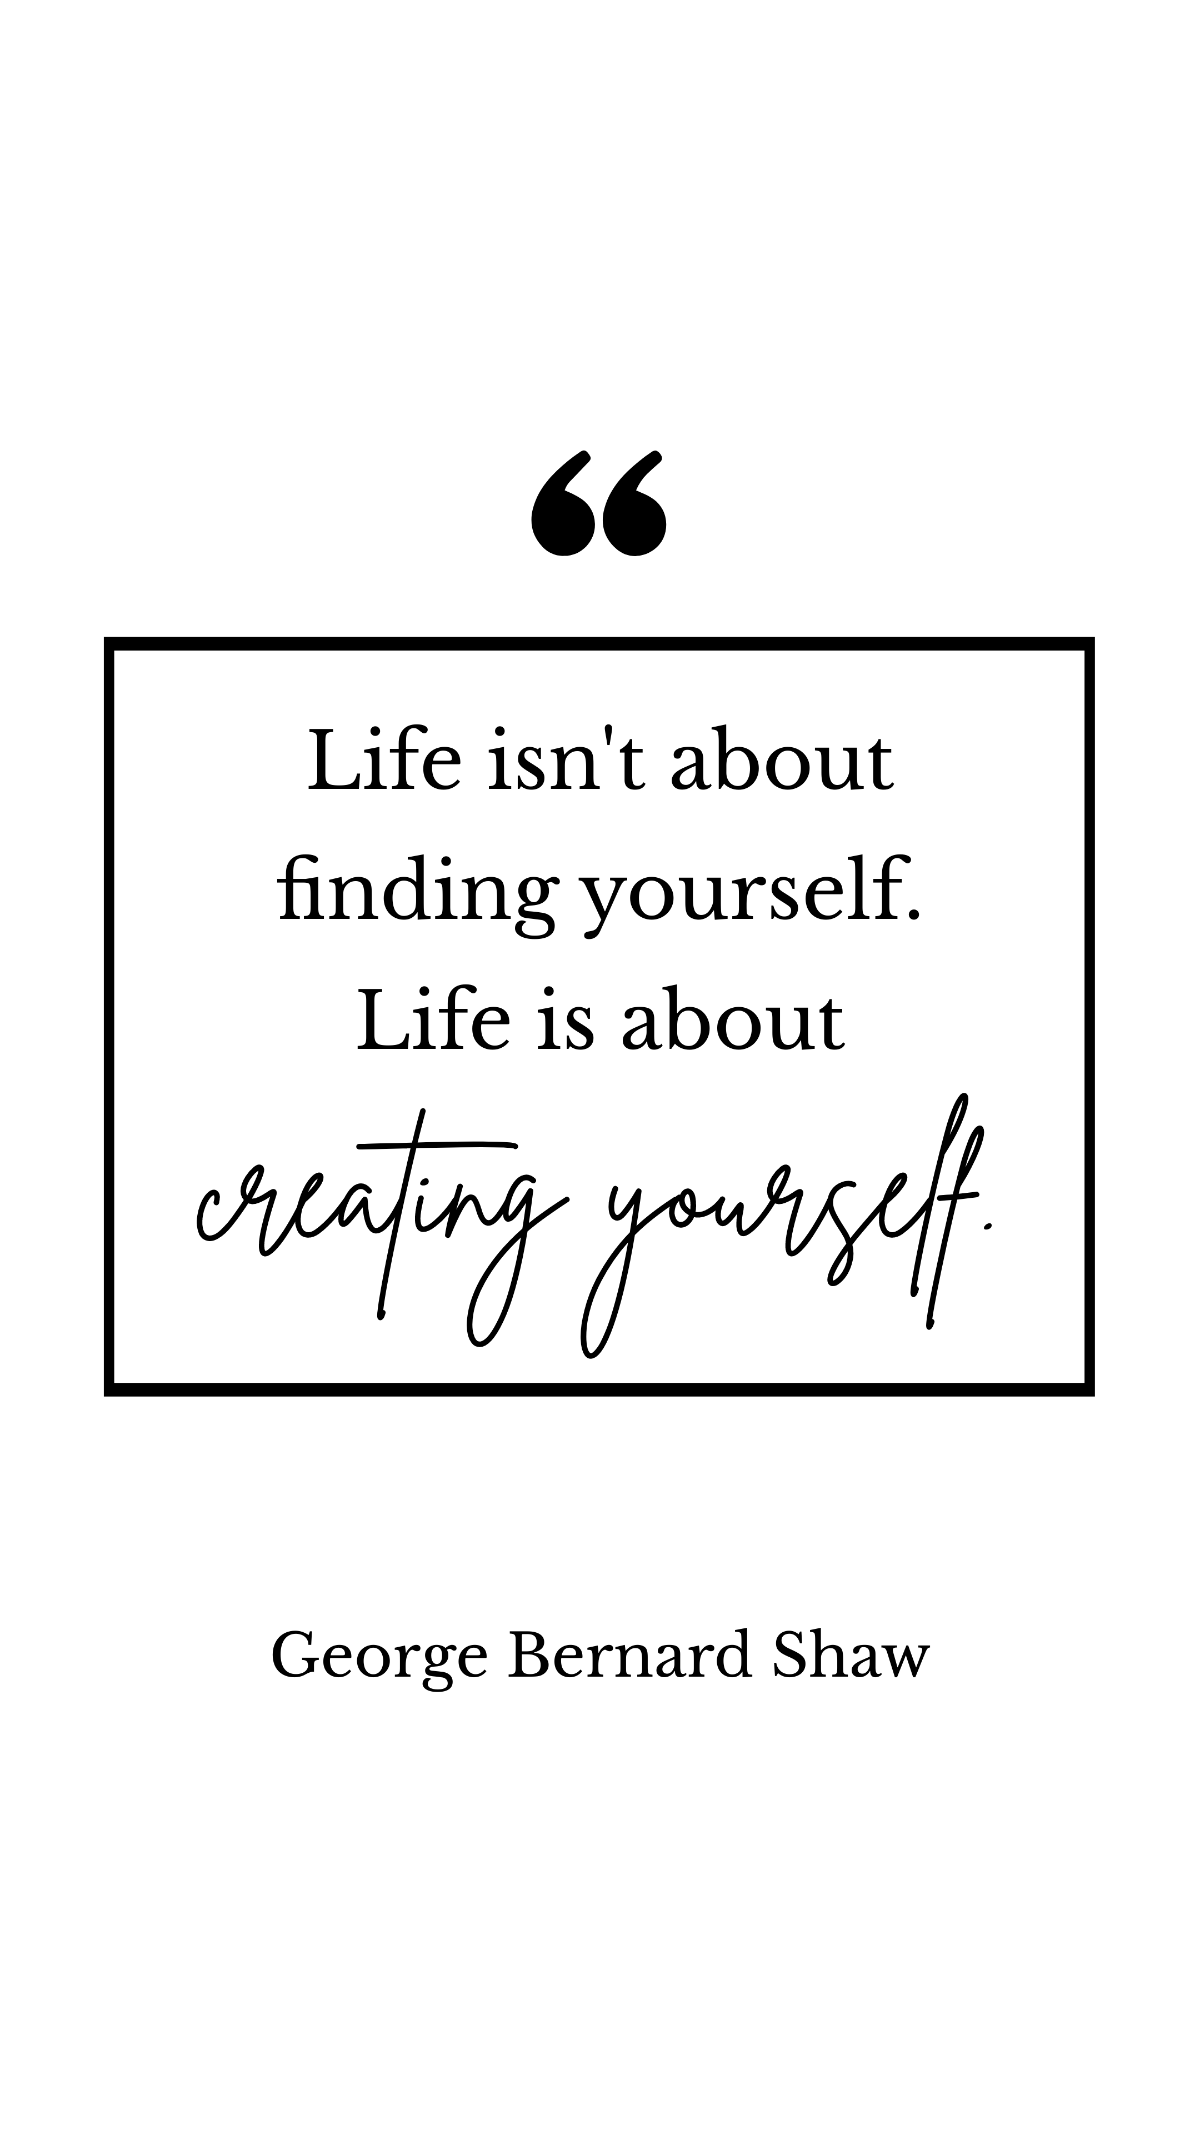 George Bernard Shaw - Life isn't about finding yourself. Life is about creating yourself. Template